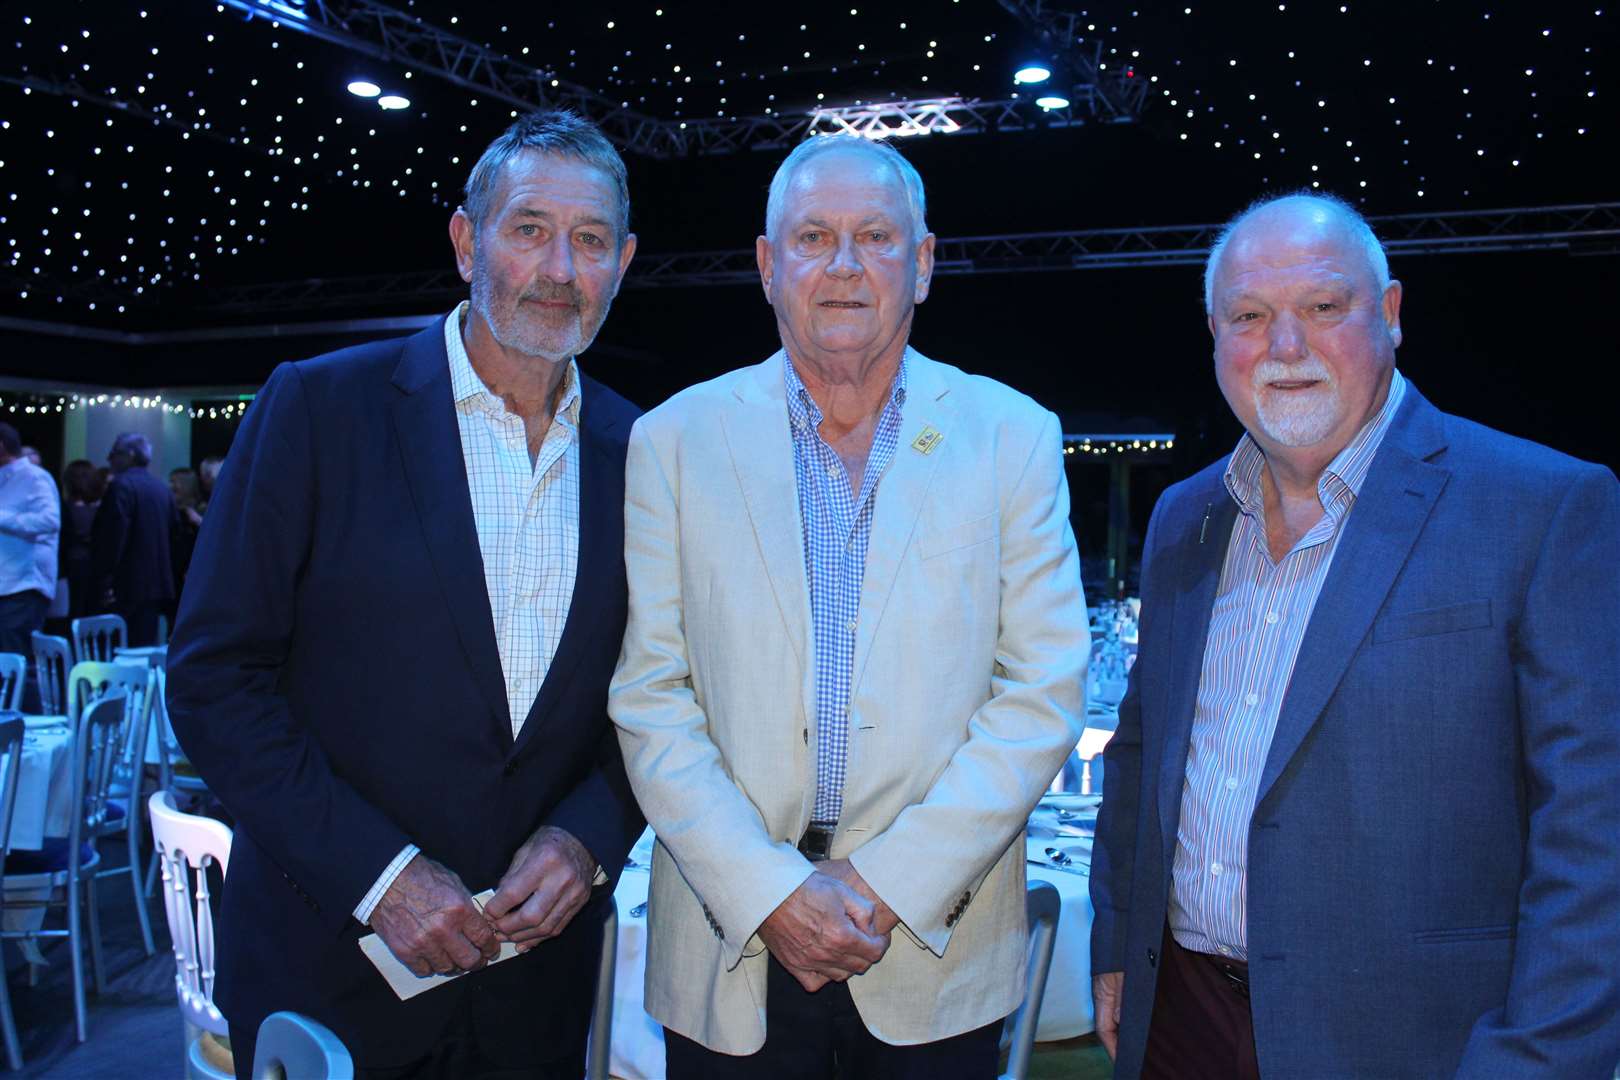 Pictured above before the Shane Warne Tribute Dinner are (left to right) Graham Gooch, Ray East and Mike Gatting. Picture: Nick Garnham